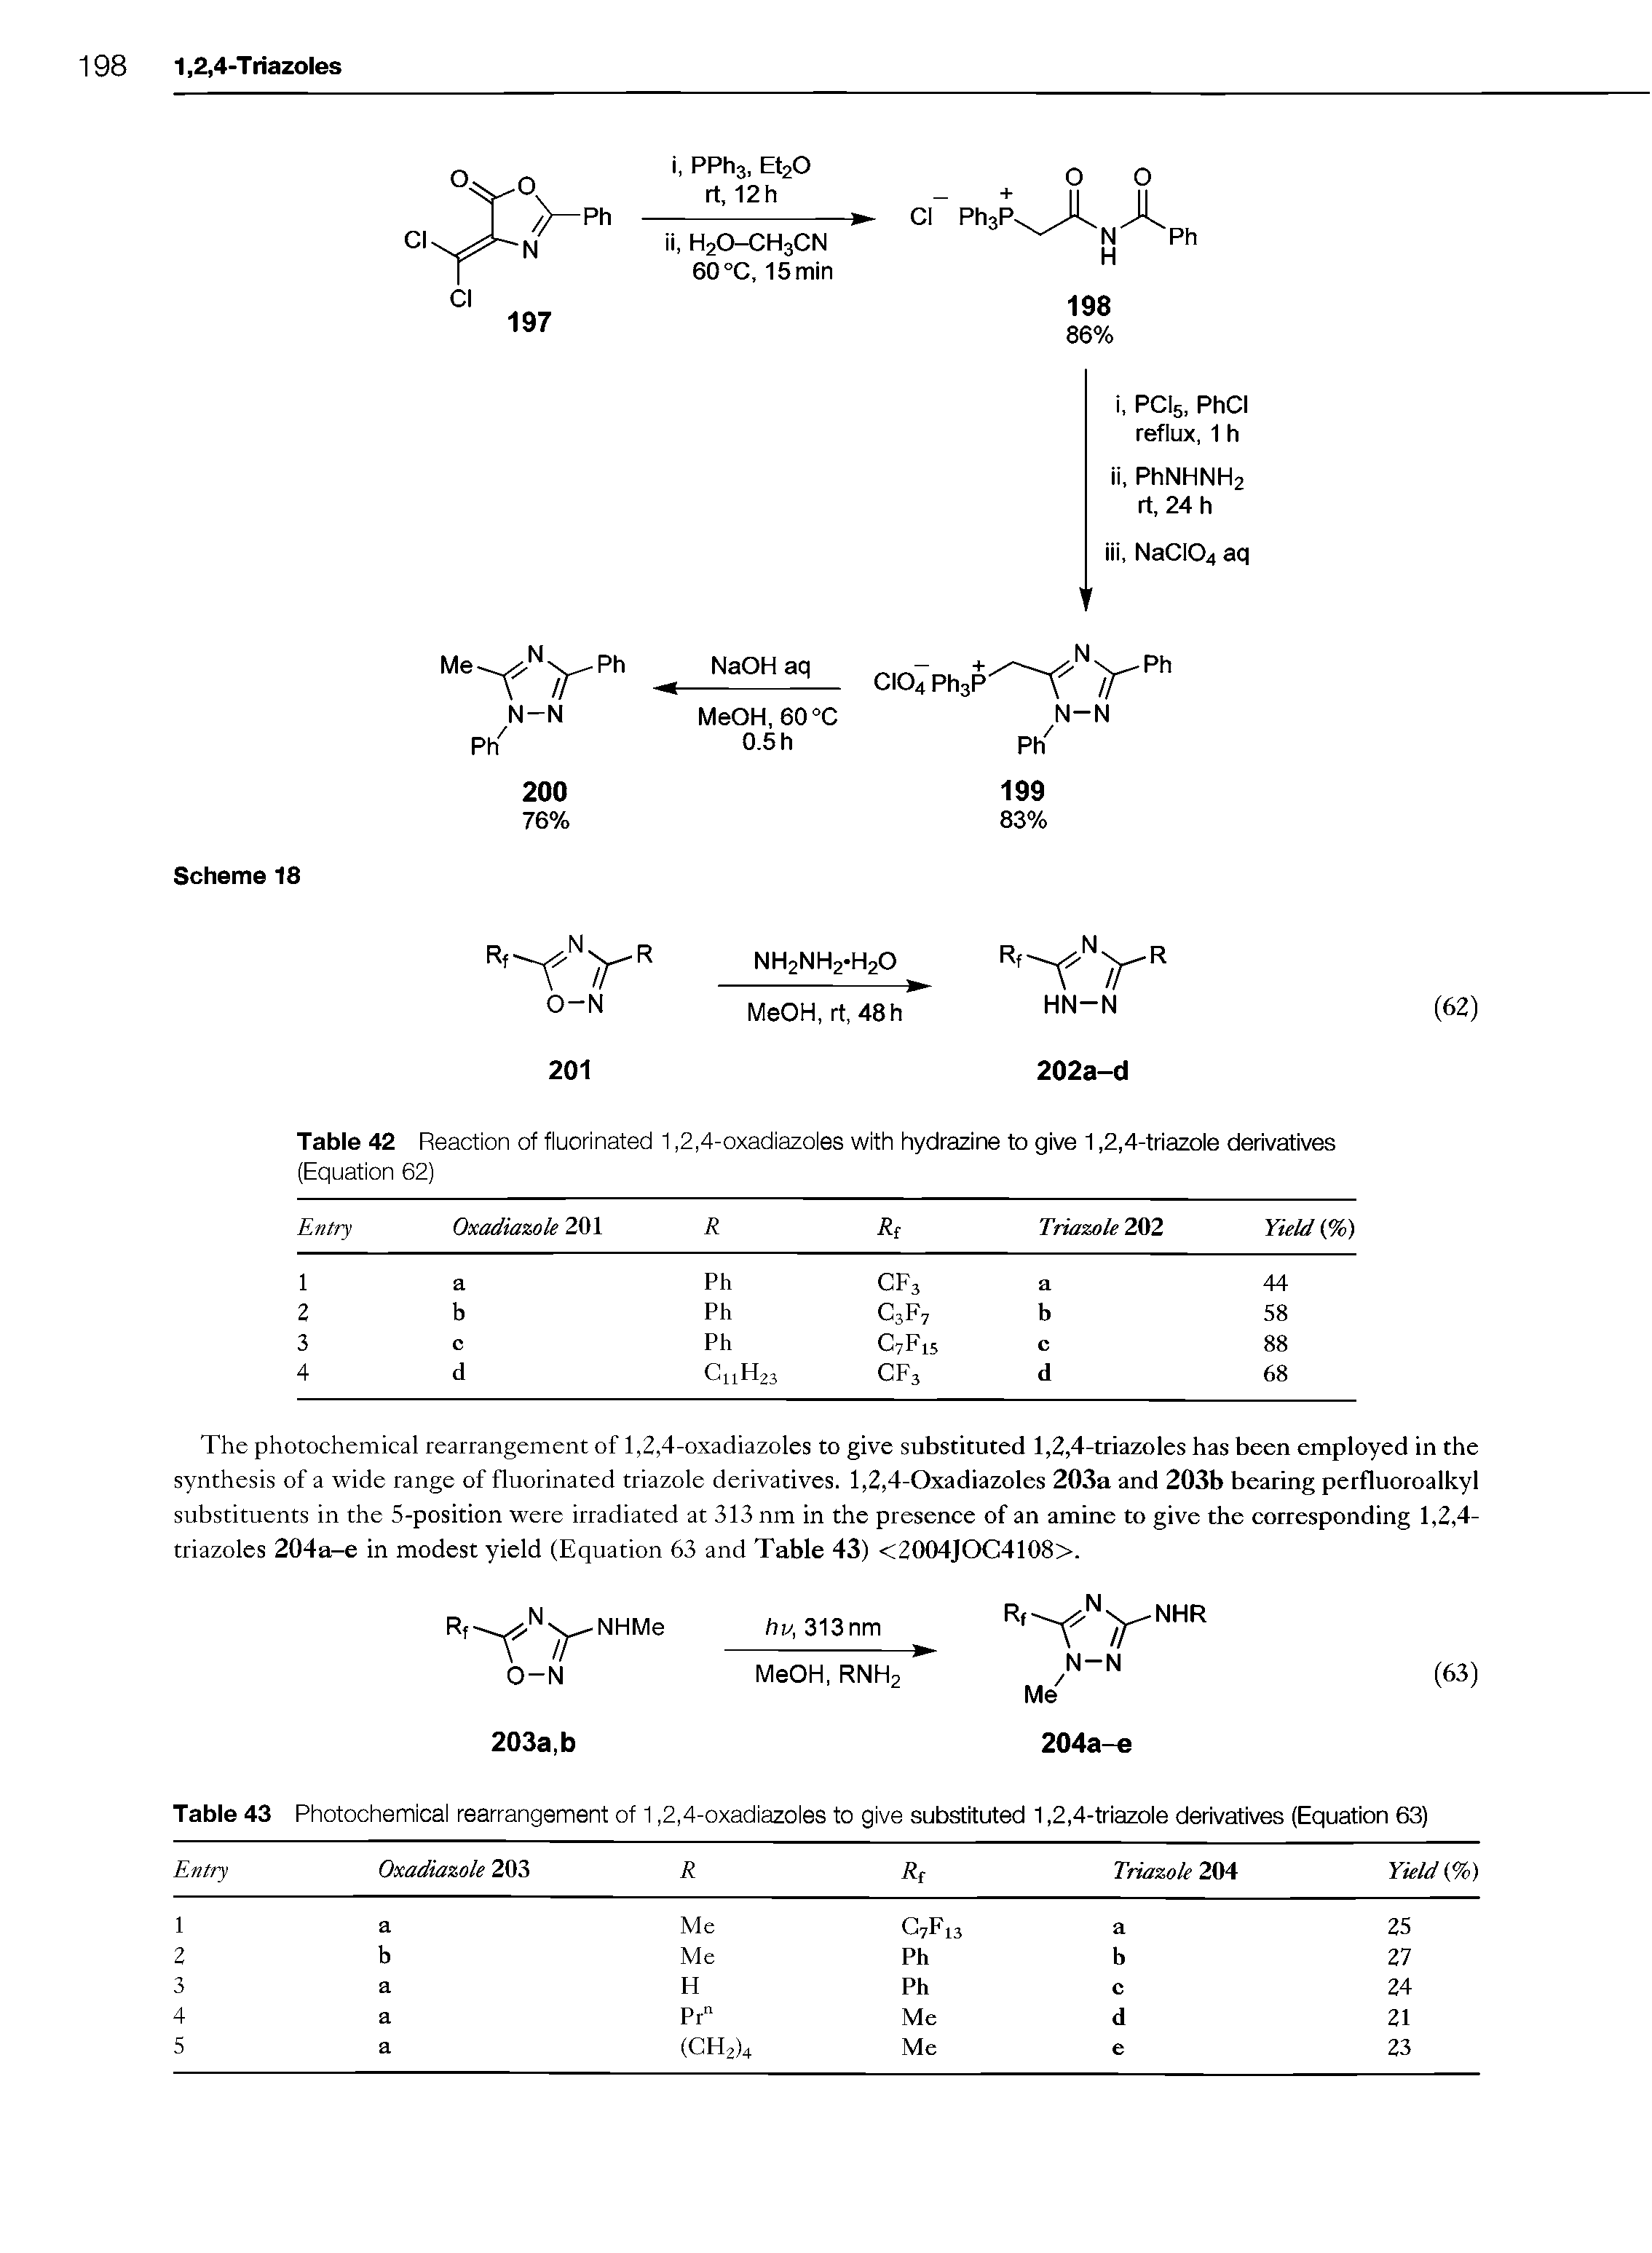 Table 43 Photochemical rearrangement of 1,2,4-oxadiazoles to give substituted 1,2,4-triazole derivatives (Equation 63)...